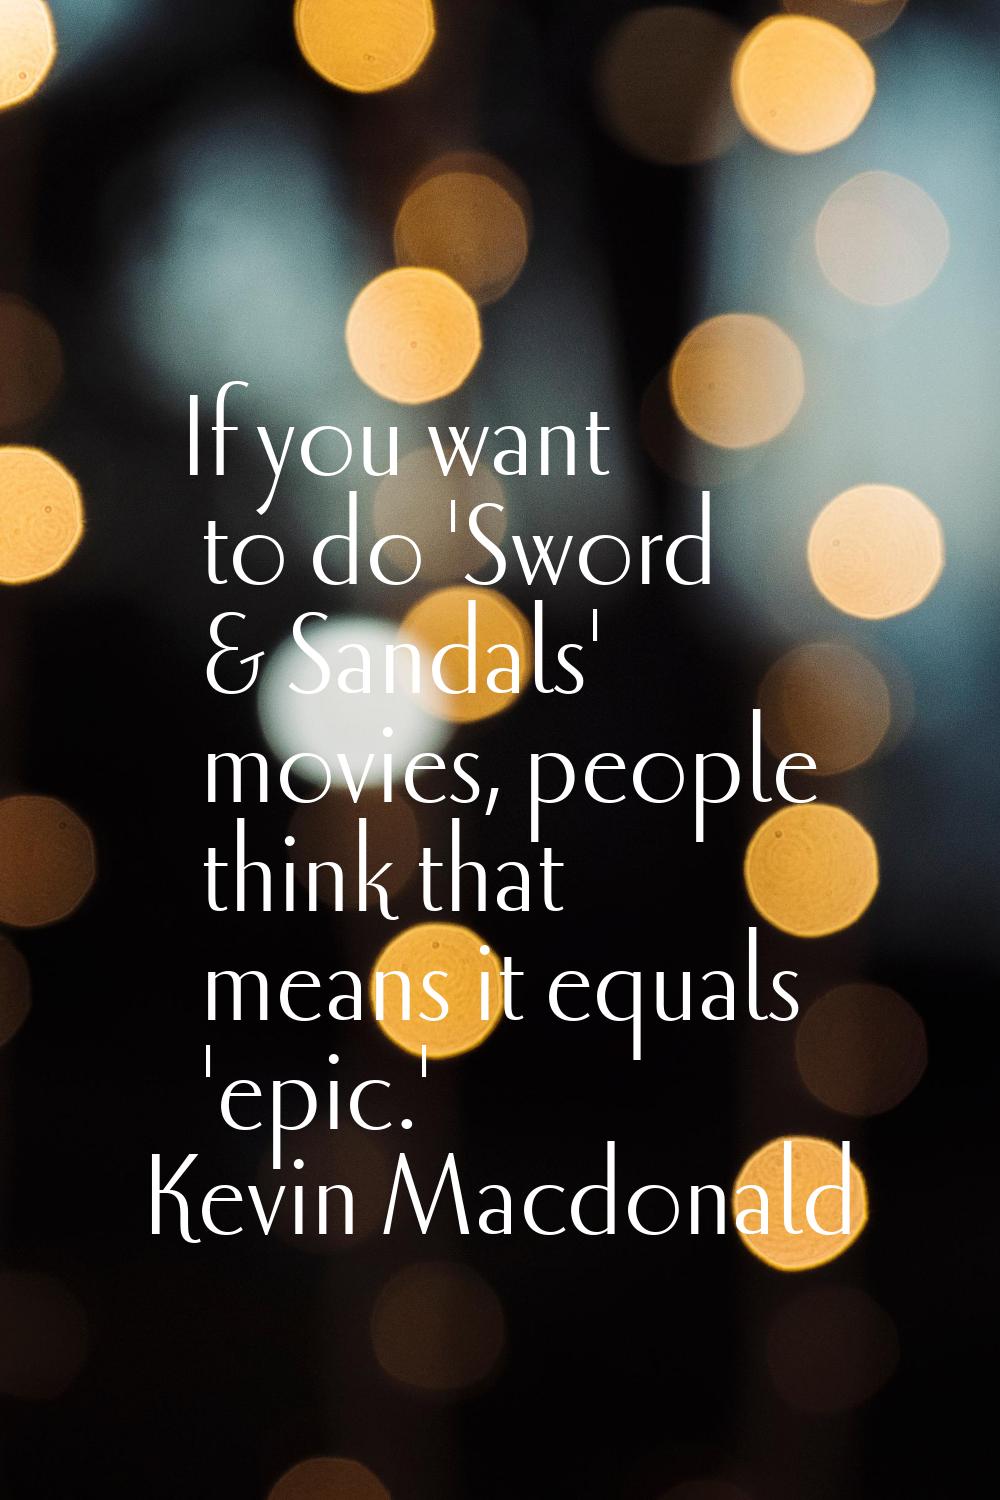 If you want to do 'Sword & Sandals' movies, people think that means it equals 'epic.'